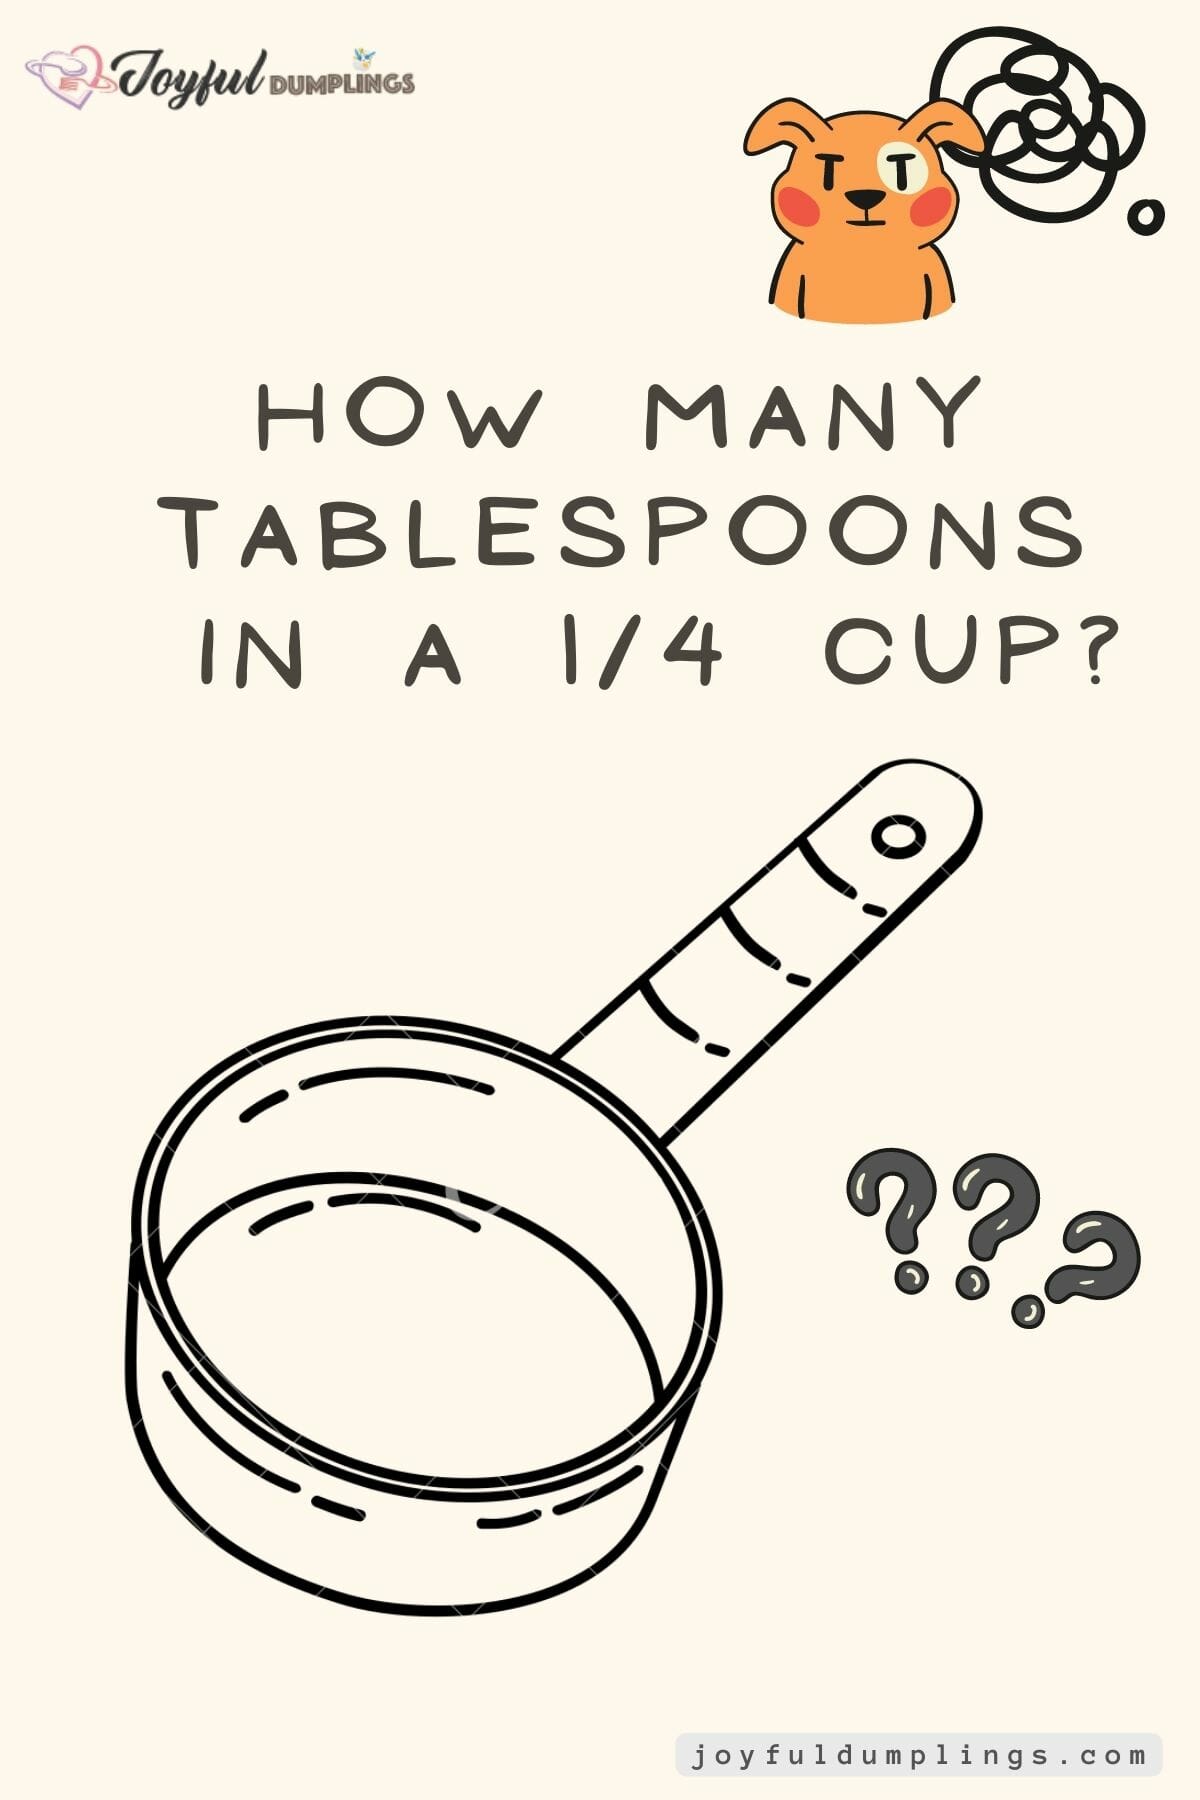 How Many Tablespoons of Coffee for 12 Cups?